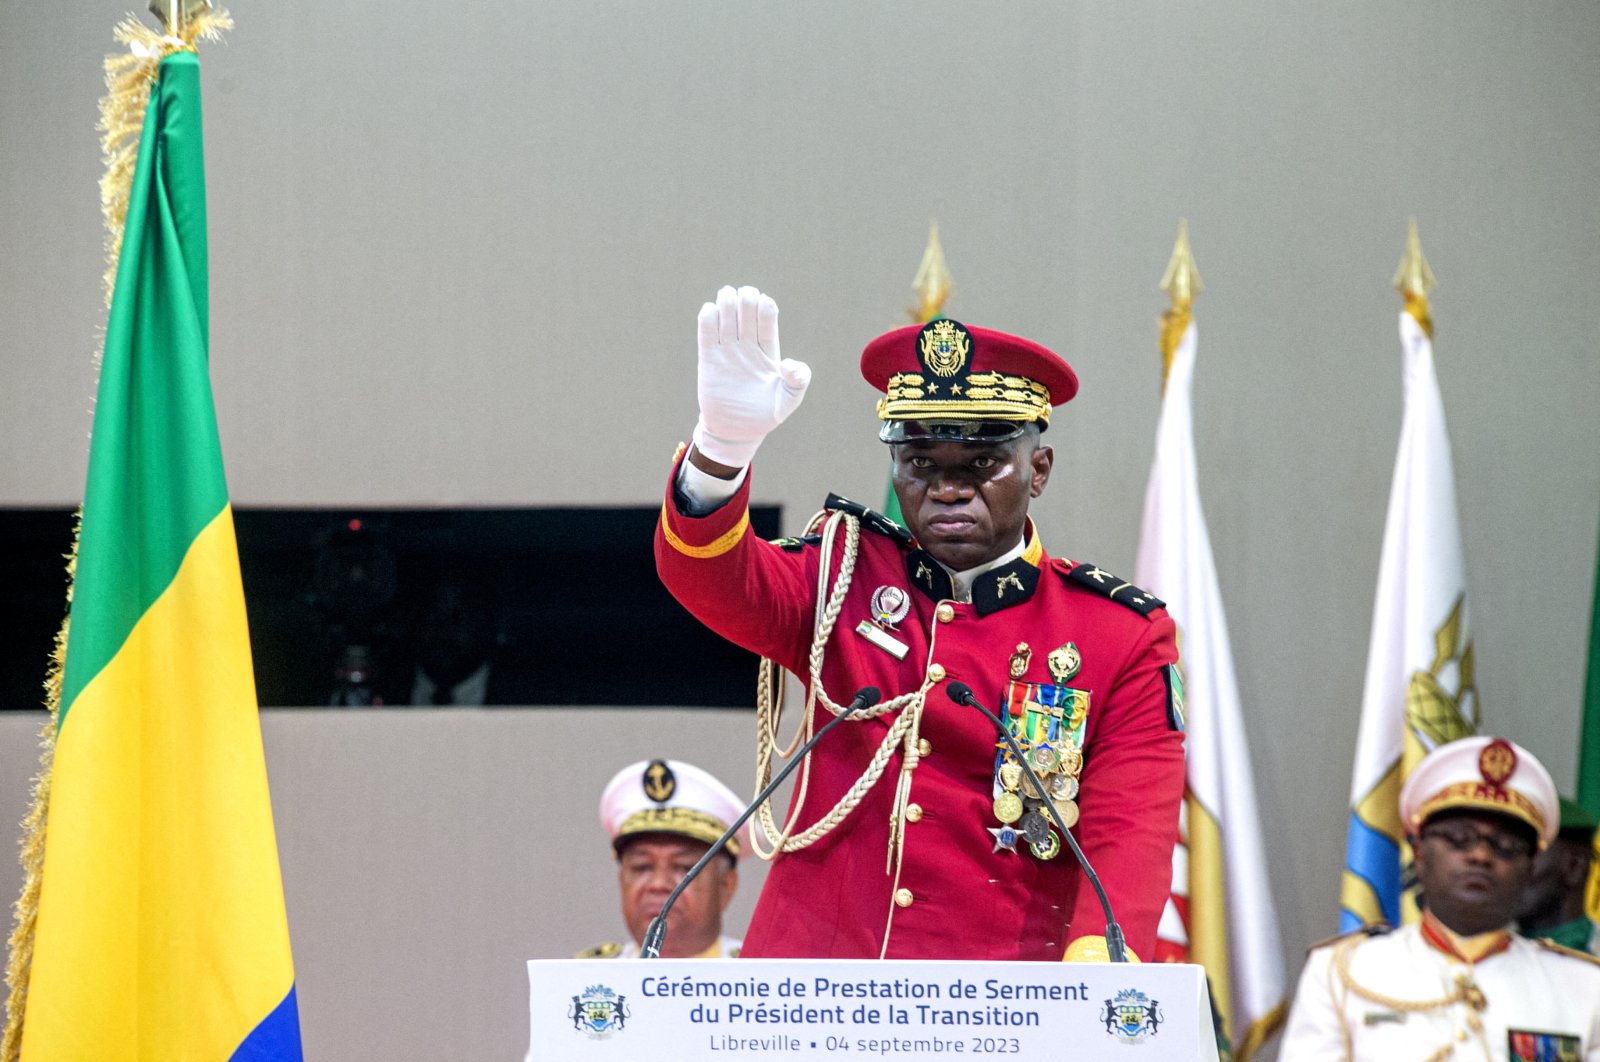 Gabon coup leader General Brice Oligui Nguema is sworn in as interim president during his swearing-in ceremony, in Libreville, Gabon, Sept. 4, 2023. (Reuters Photo)